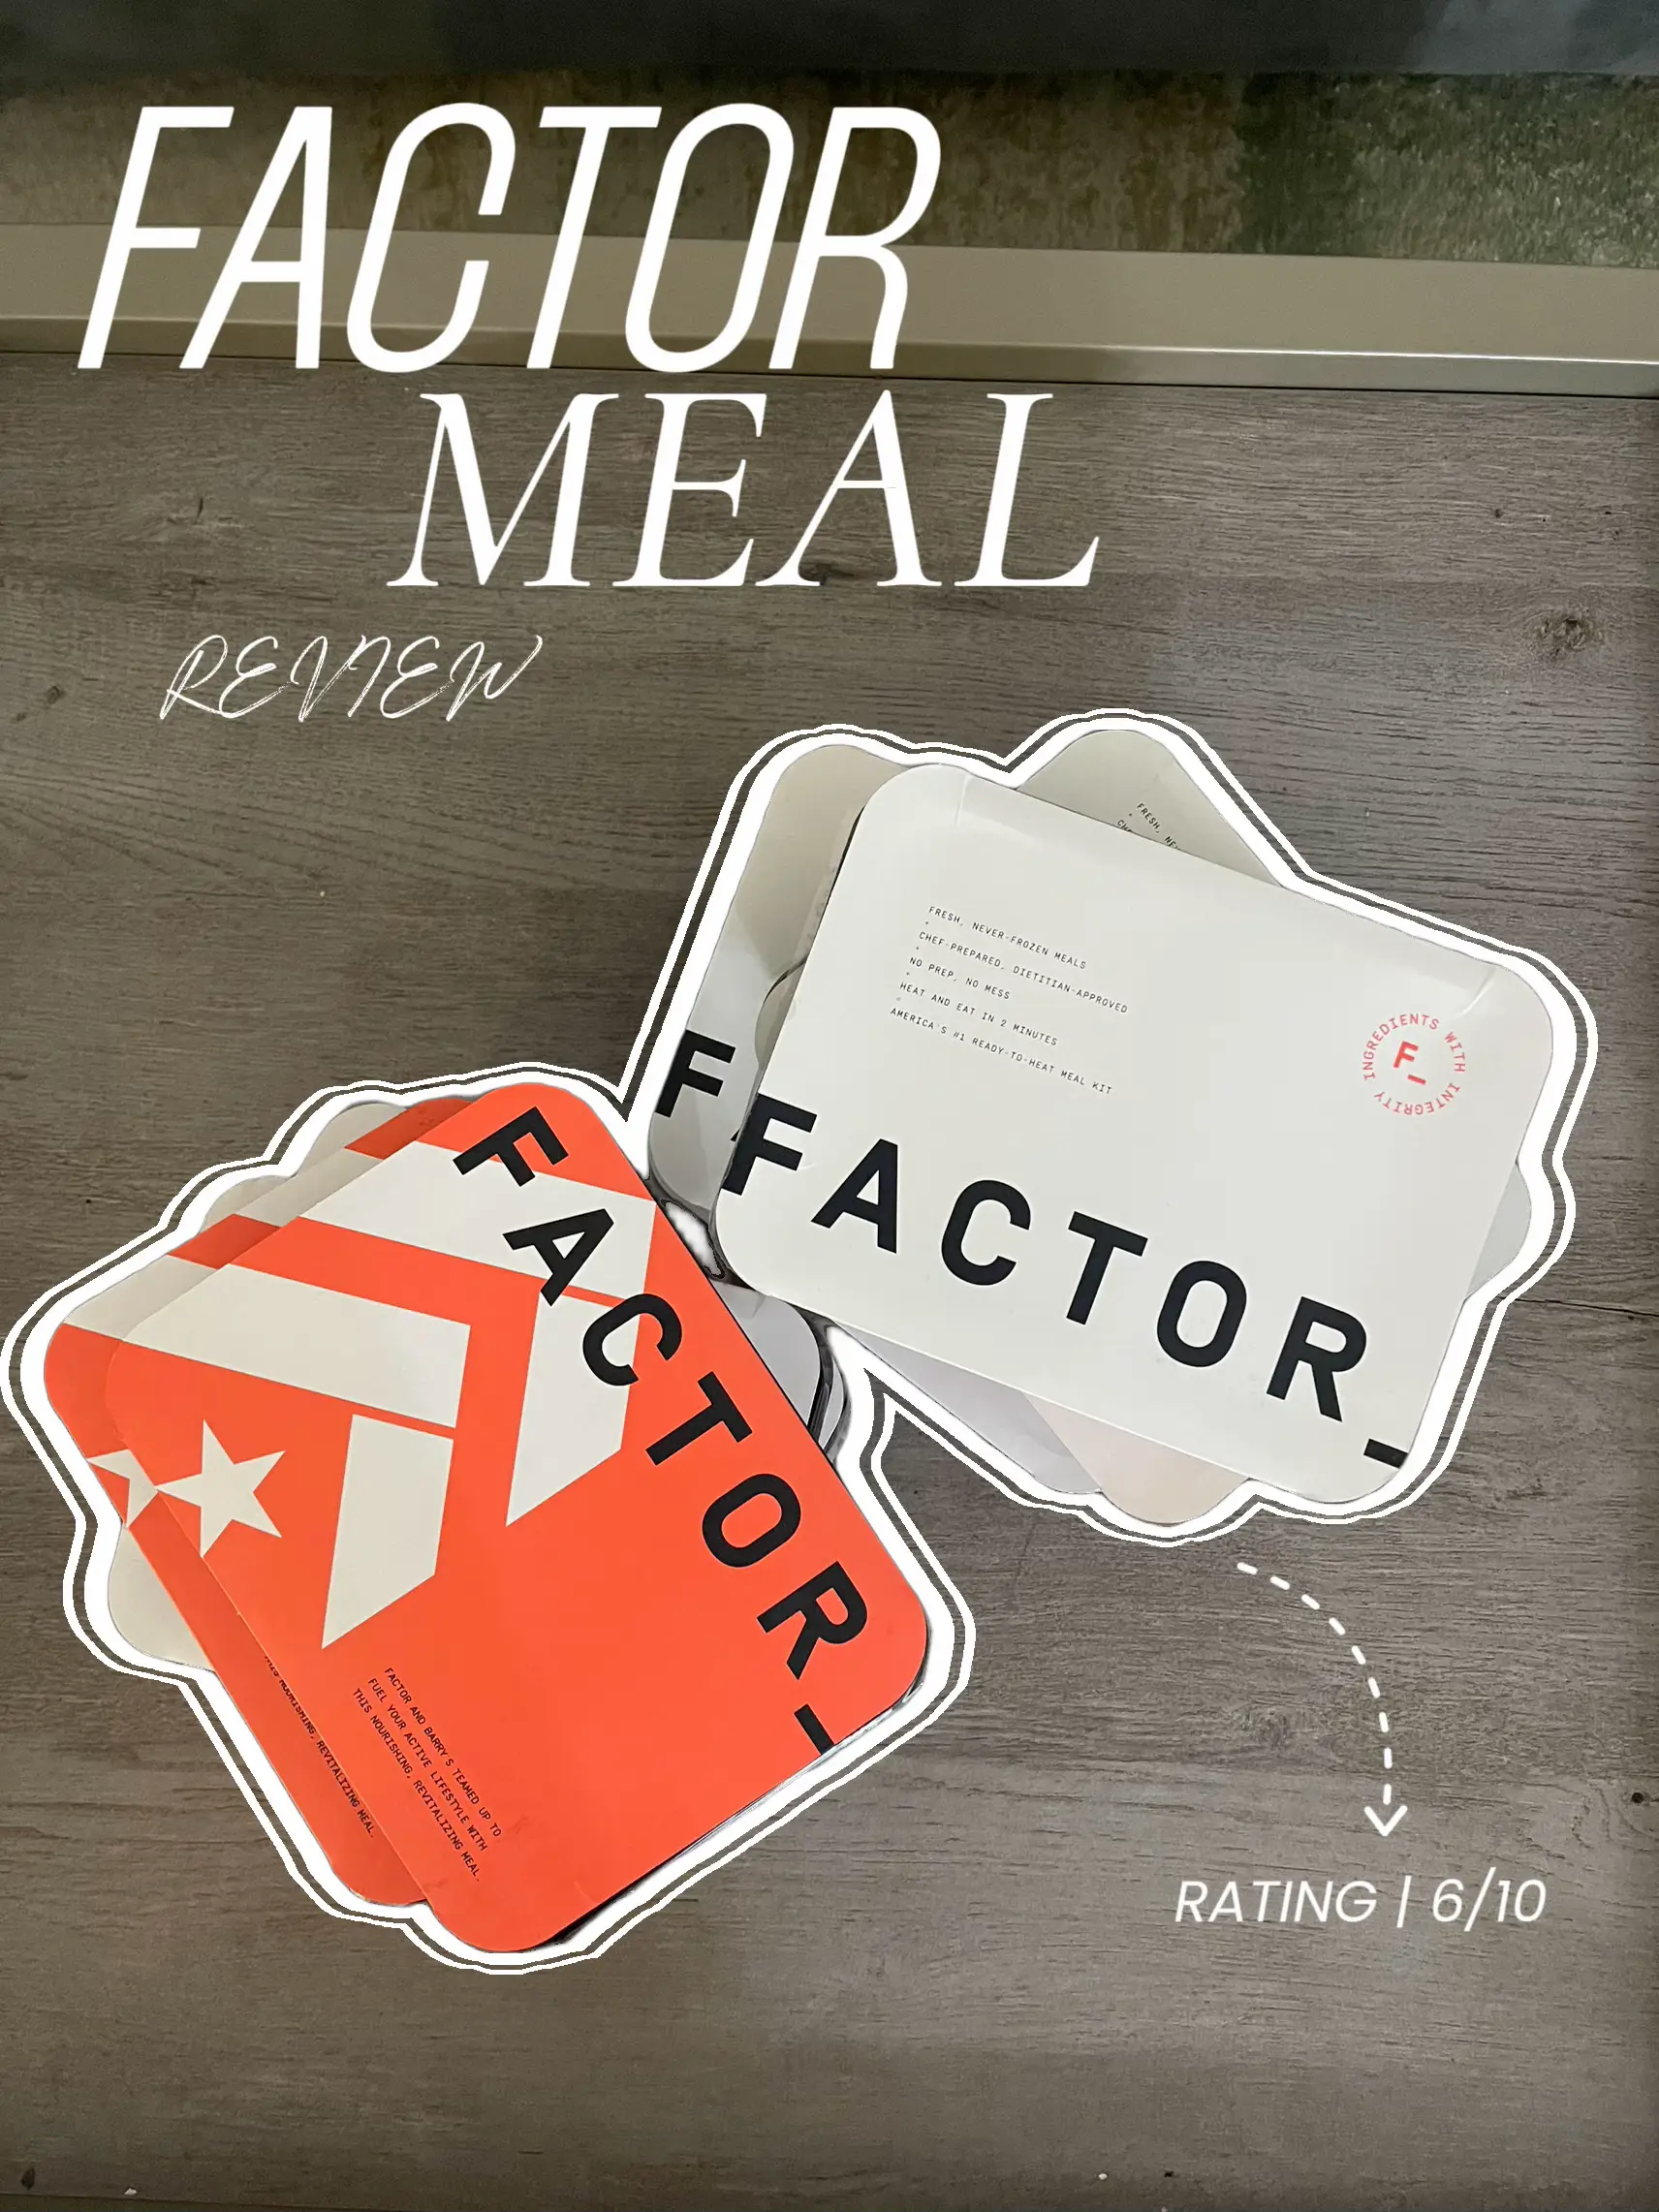 I Tried Out Factor Meals for One Week 